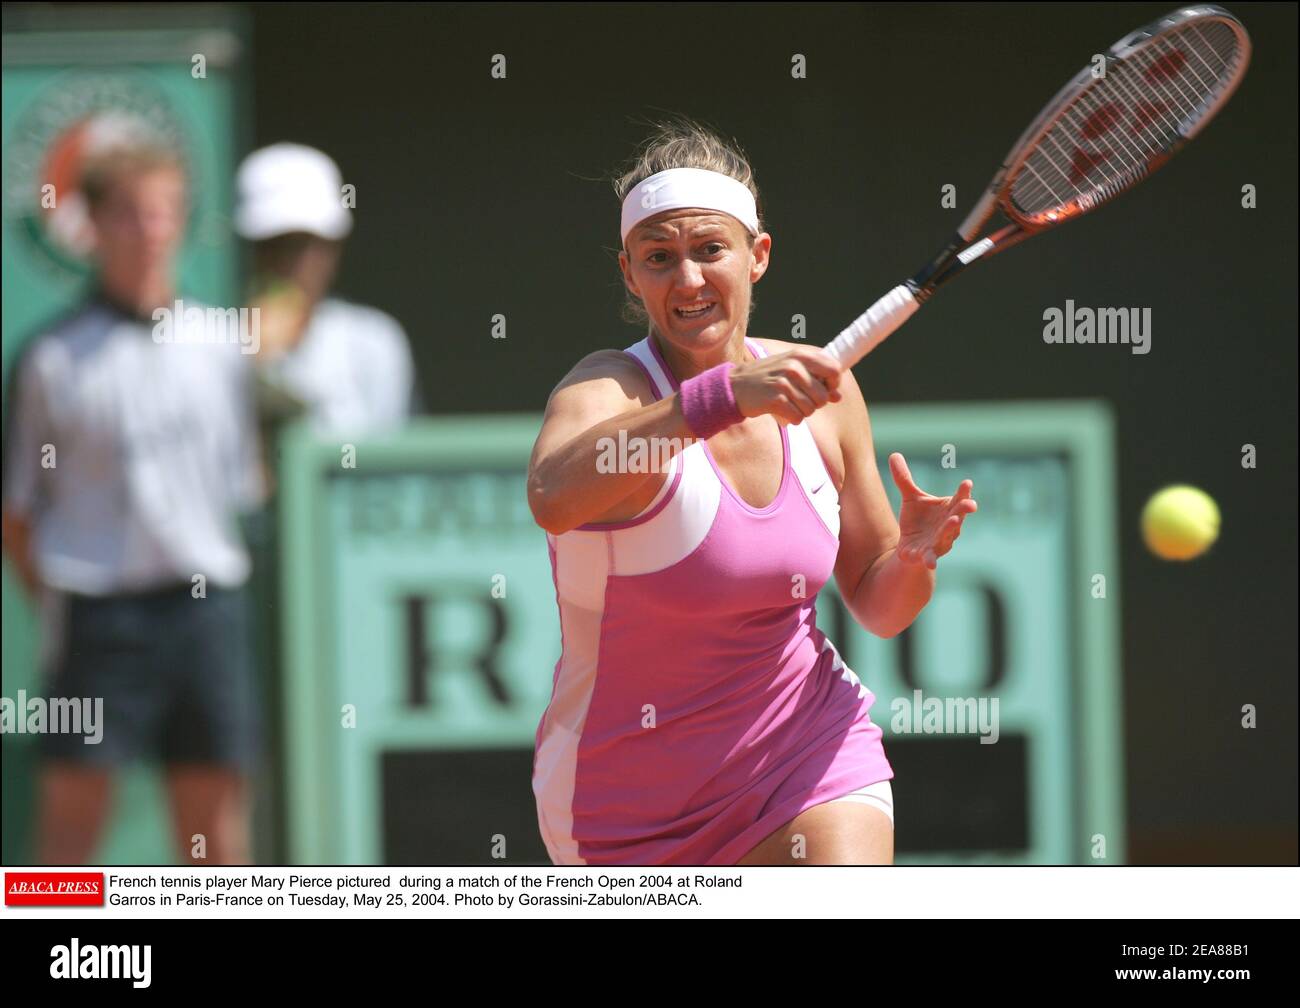 French tennis player Mary Pierce pictured during a match of the French Open 2004 at Roland Garros in Paris-France on Tuesday, May 25, 2004. Photo by Gorassini-Zabulon/ABACA. Stock Photo